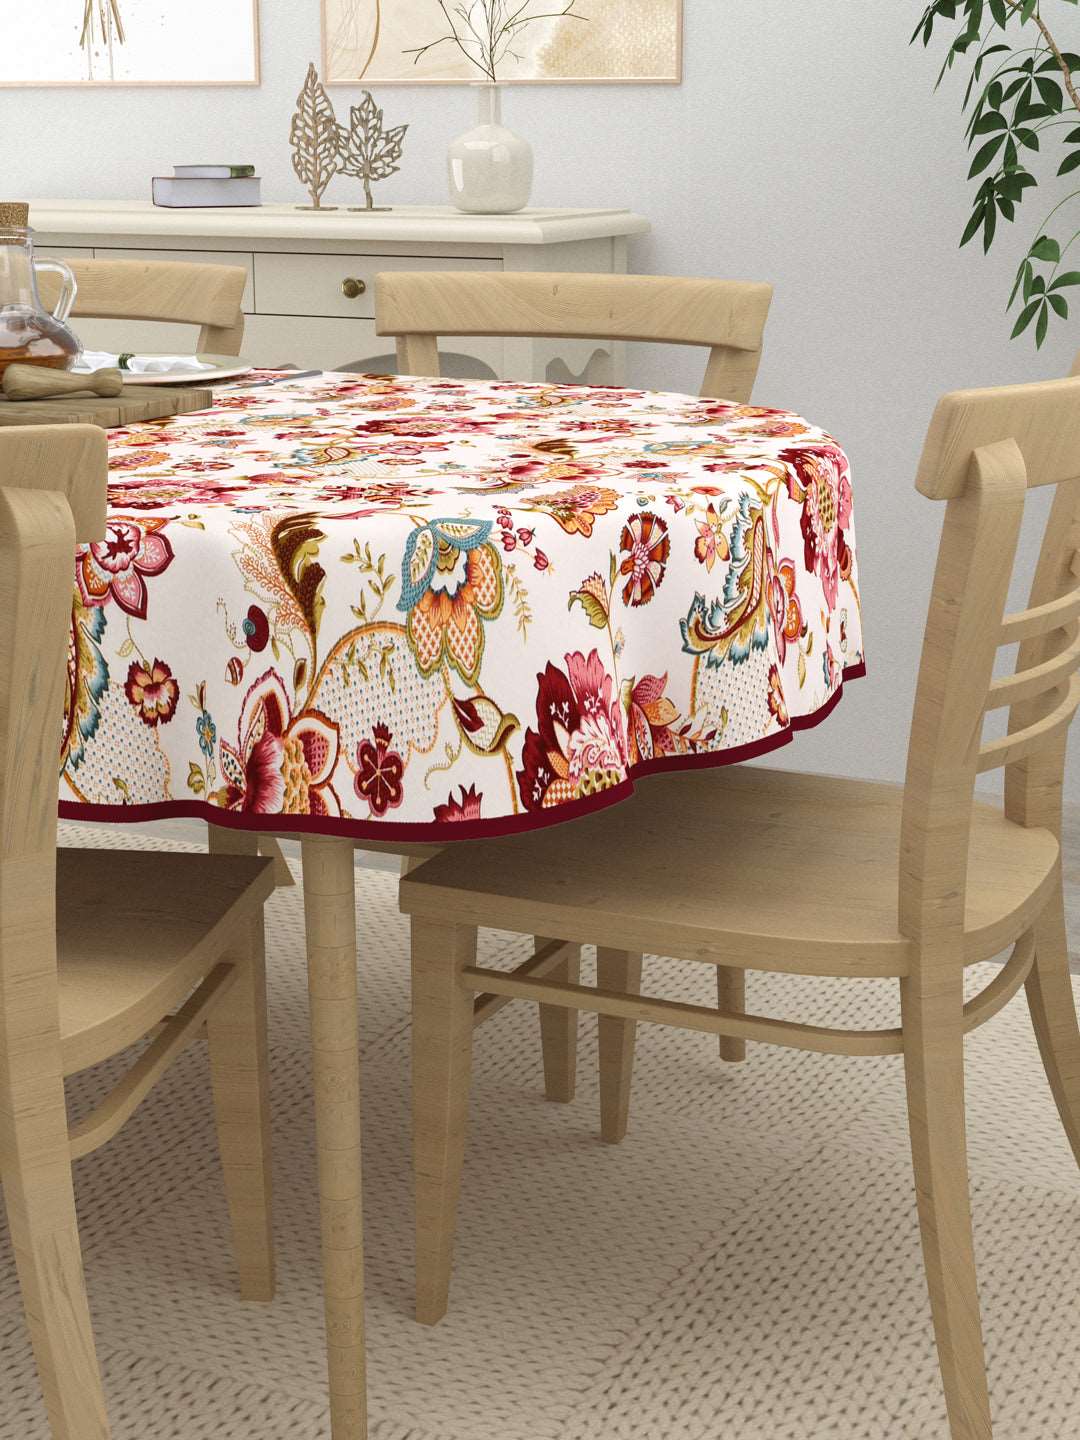 100% Cotton Oval Table Cover; Maroon Flowers